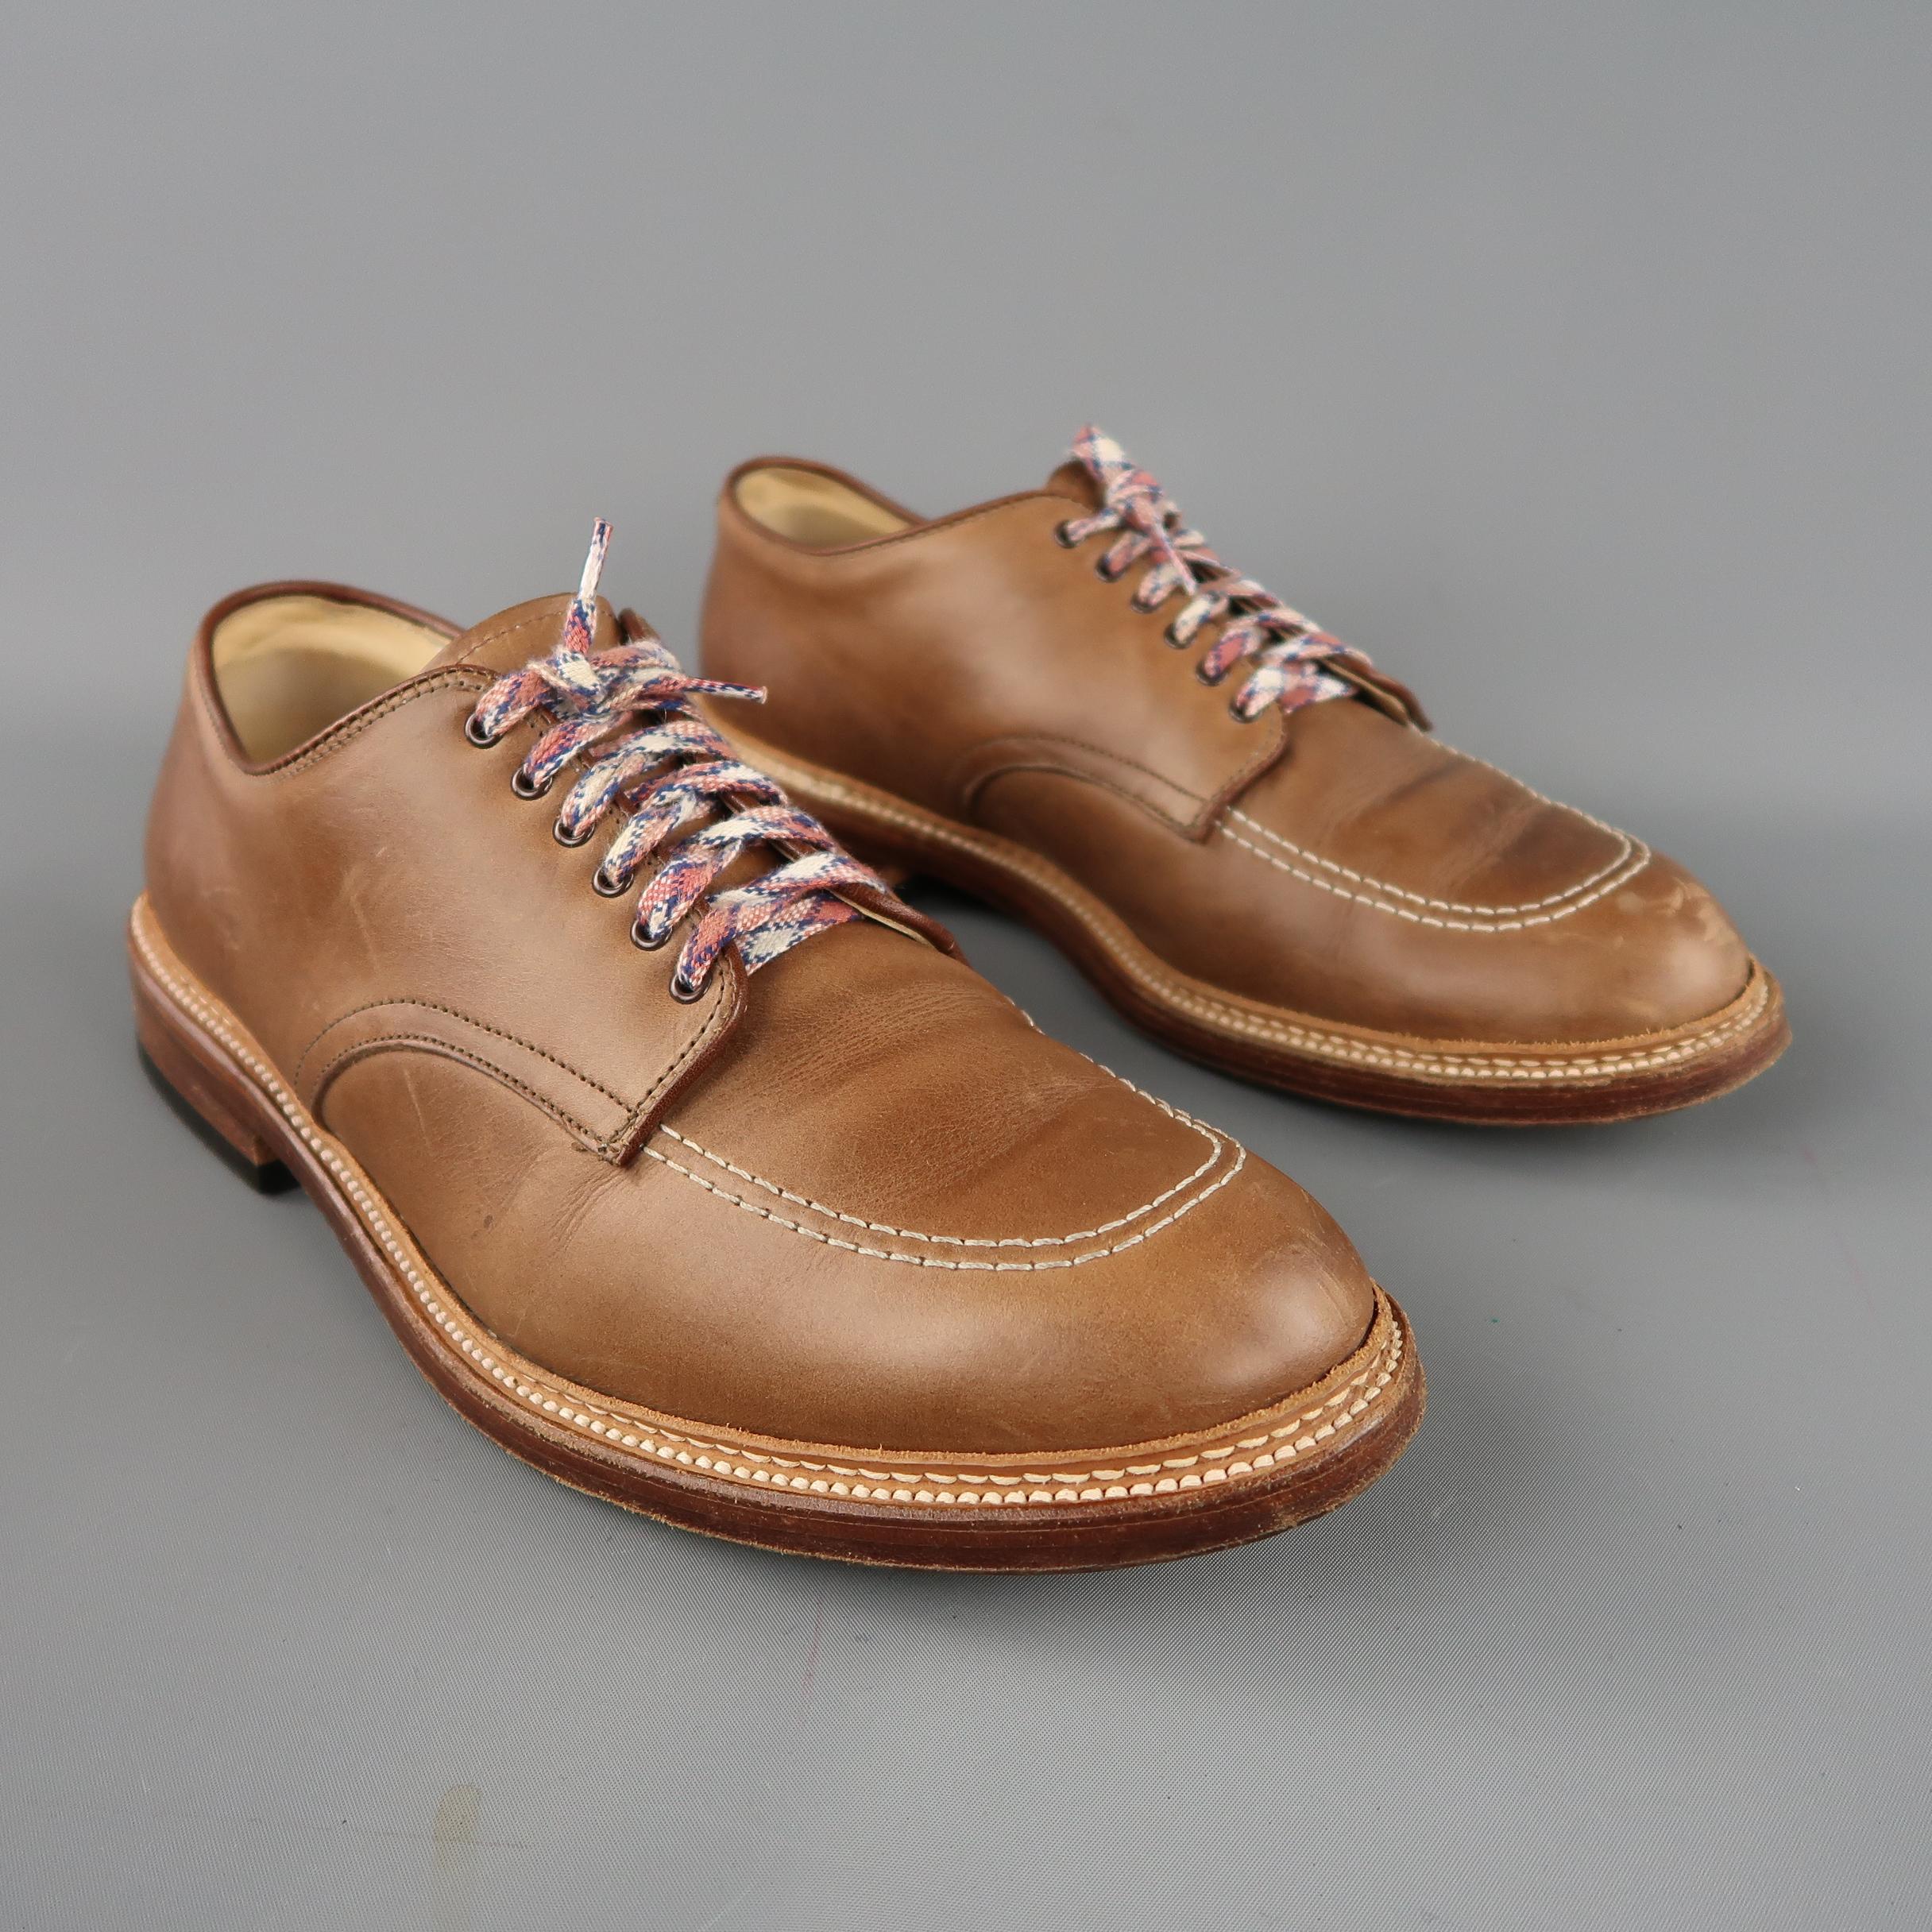 ALDEN indy shoe come in tan leather, with contrast stitch and plaid tie, lace up. As - is. Made in USA.
 
Good  Pre-Owned Condition
Marked: 10.5
 
Measurements:
Outsole: 13 x 3.5  in.